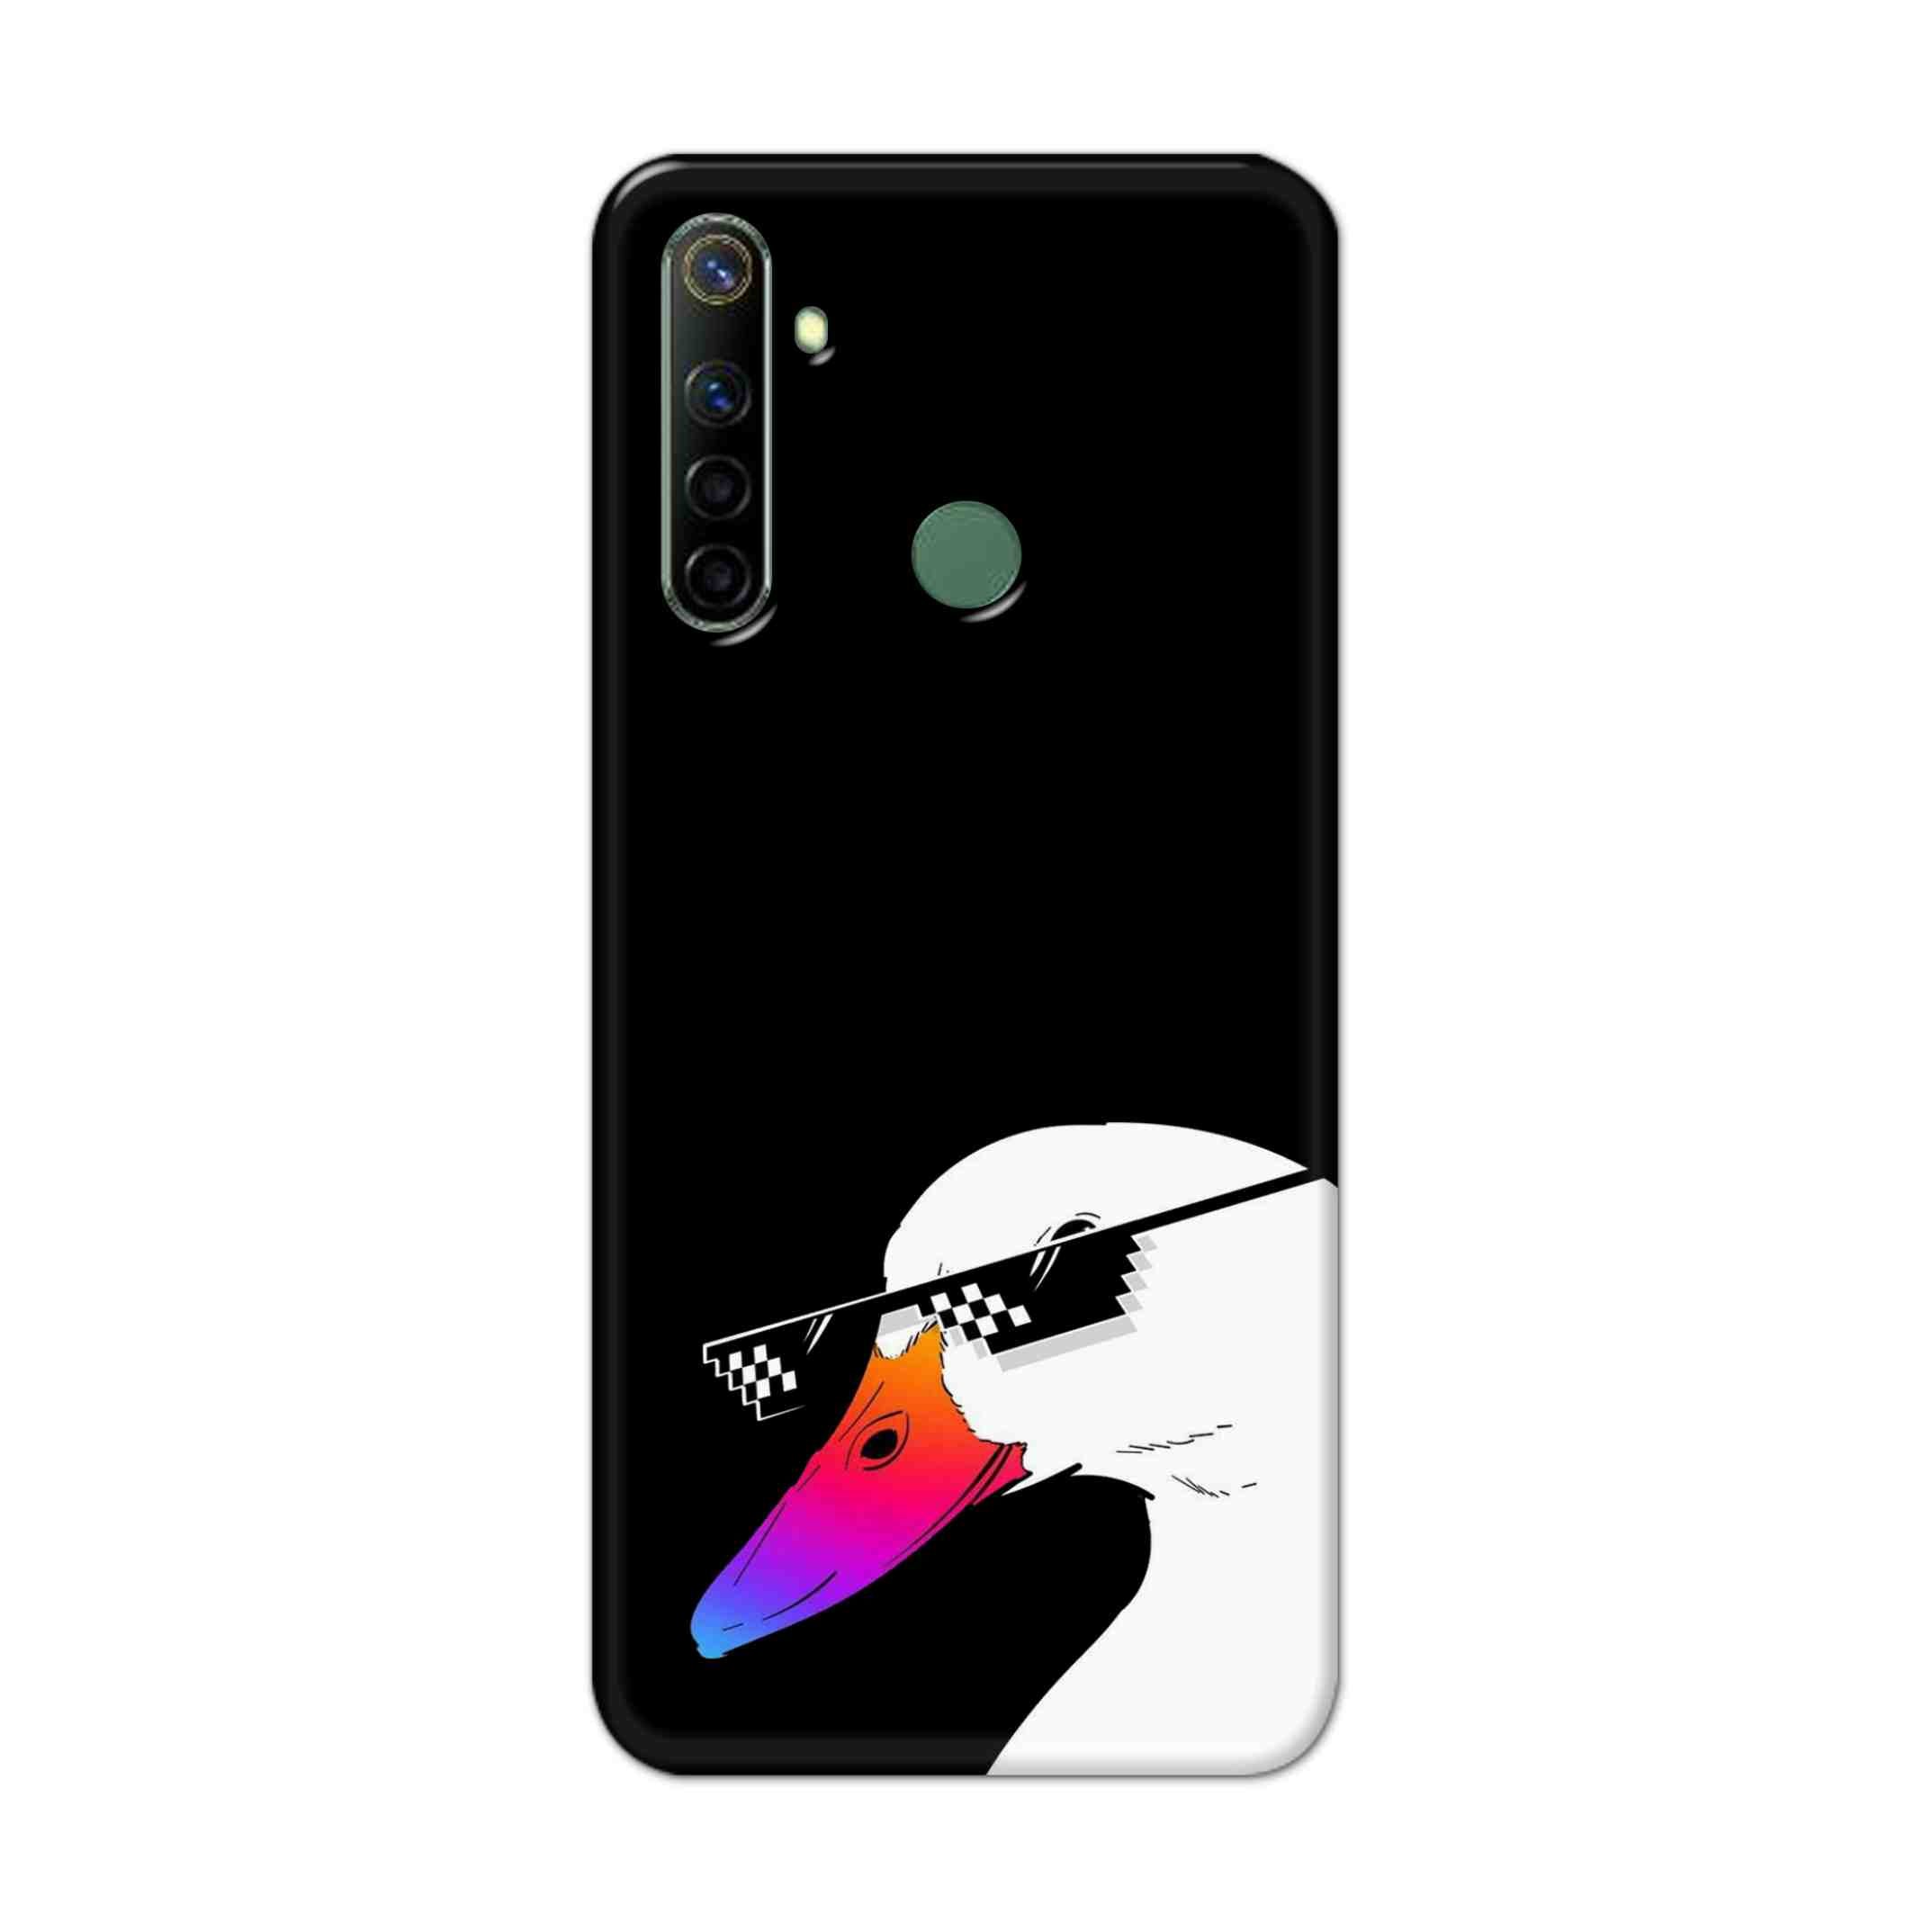 Buy Neon Duck Hard Back Mobile Phone Case Cover For Realme Narzo 10a Online